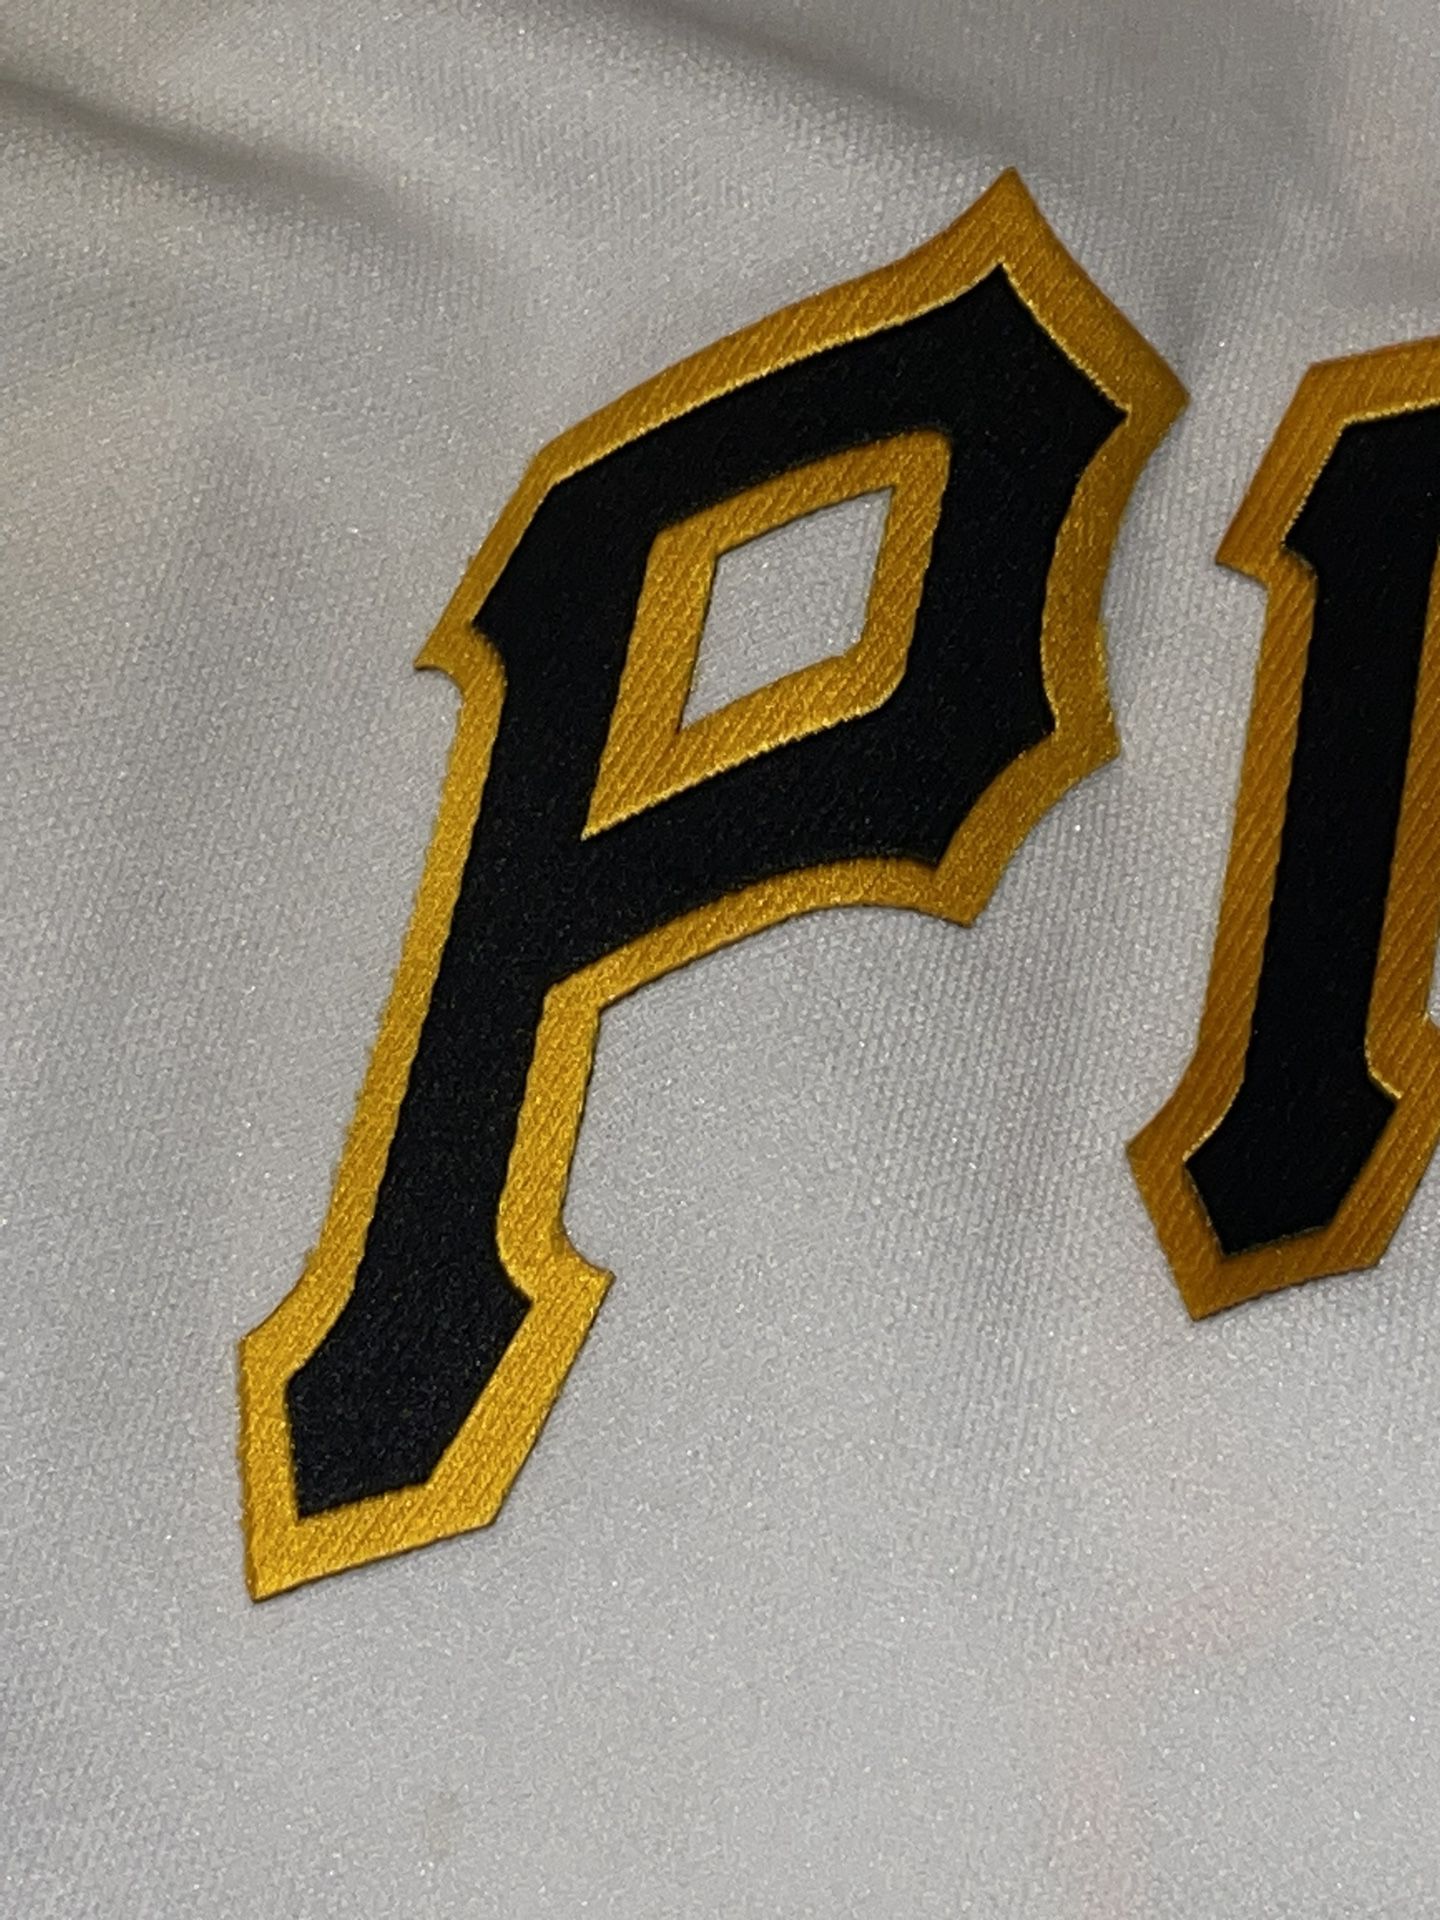 Majestic MLB Pittsburgh Pirates Neil Walker Jersey Boys Size 10/12 Used Pre  Own for Sale in North Versailles, PA - OfferUp